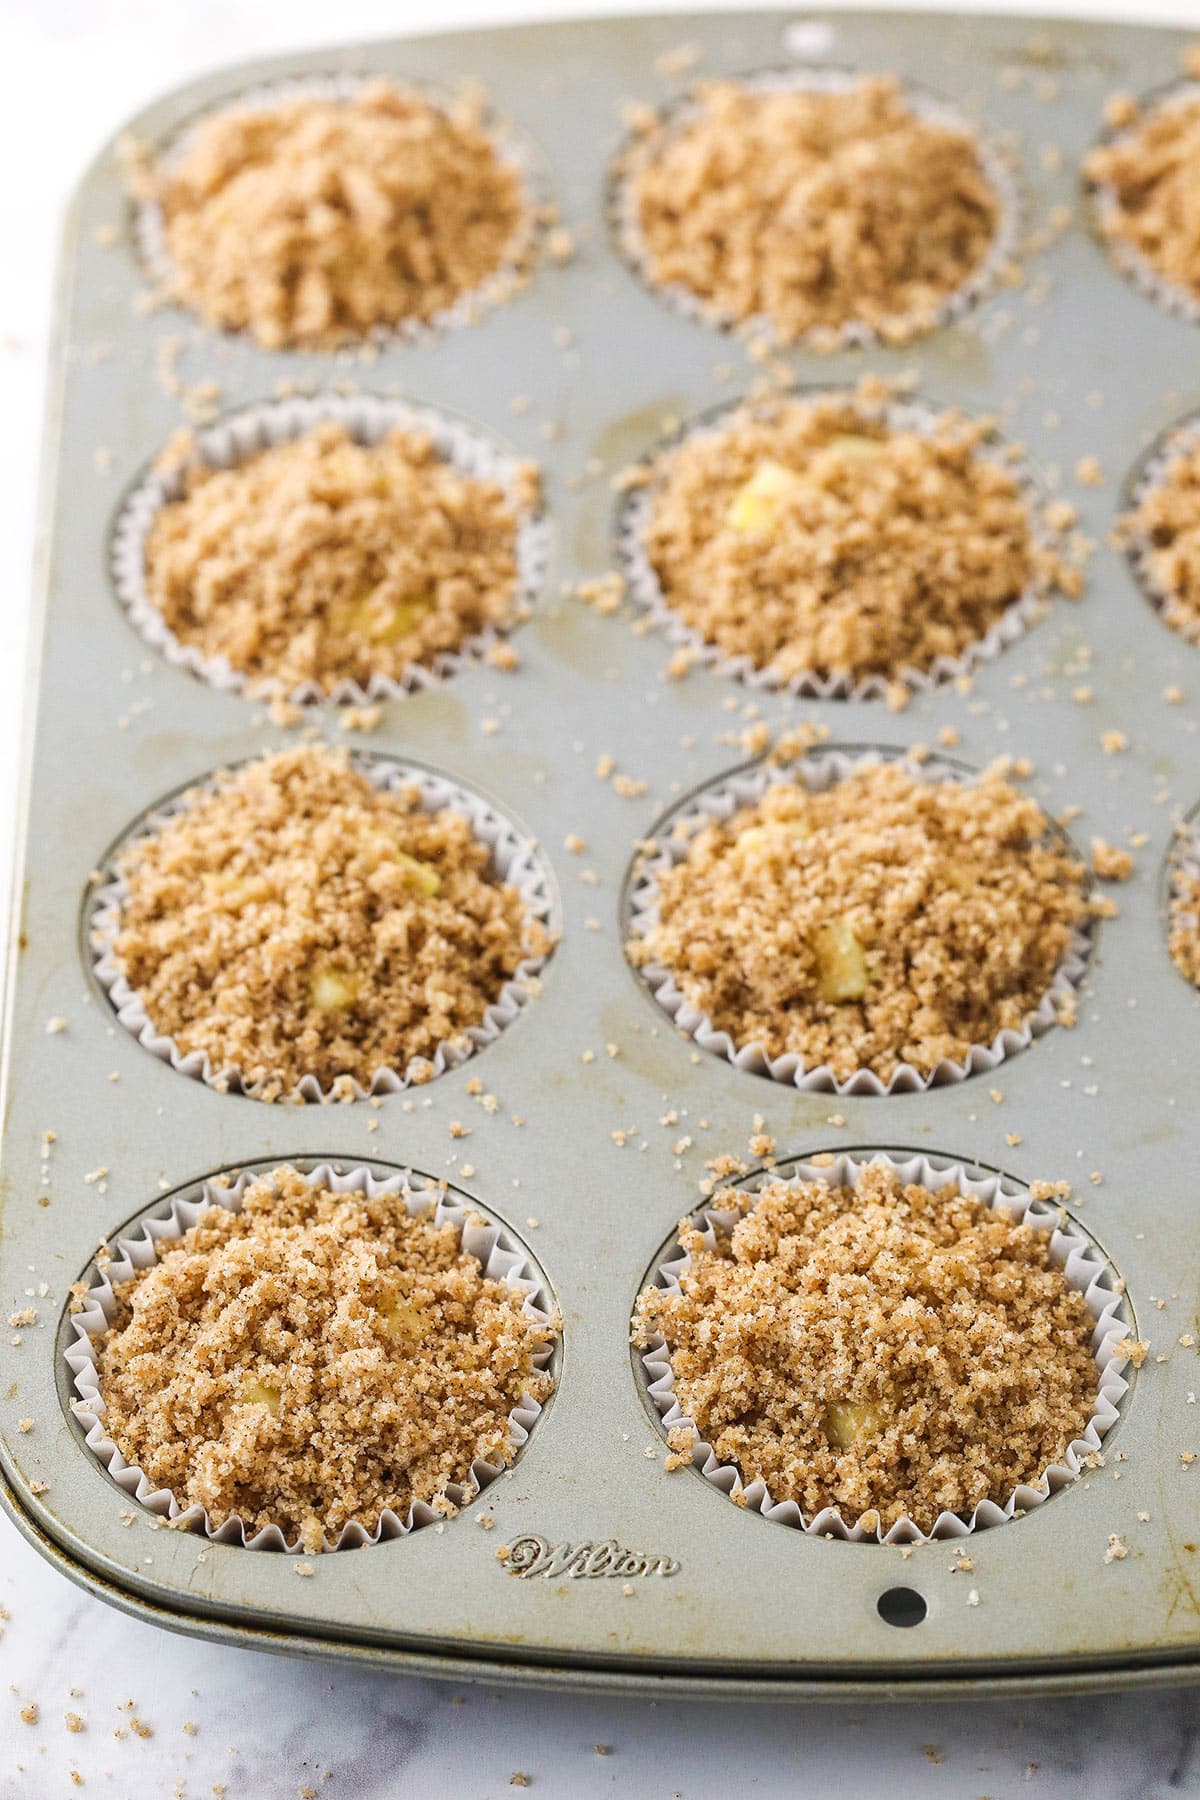 unbaked apple muffins and streusel in the muffin pan